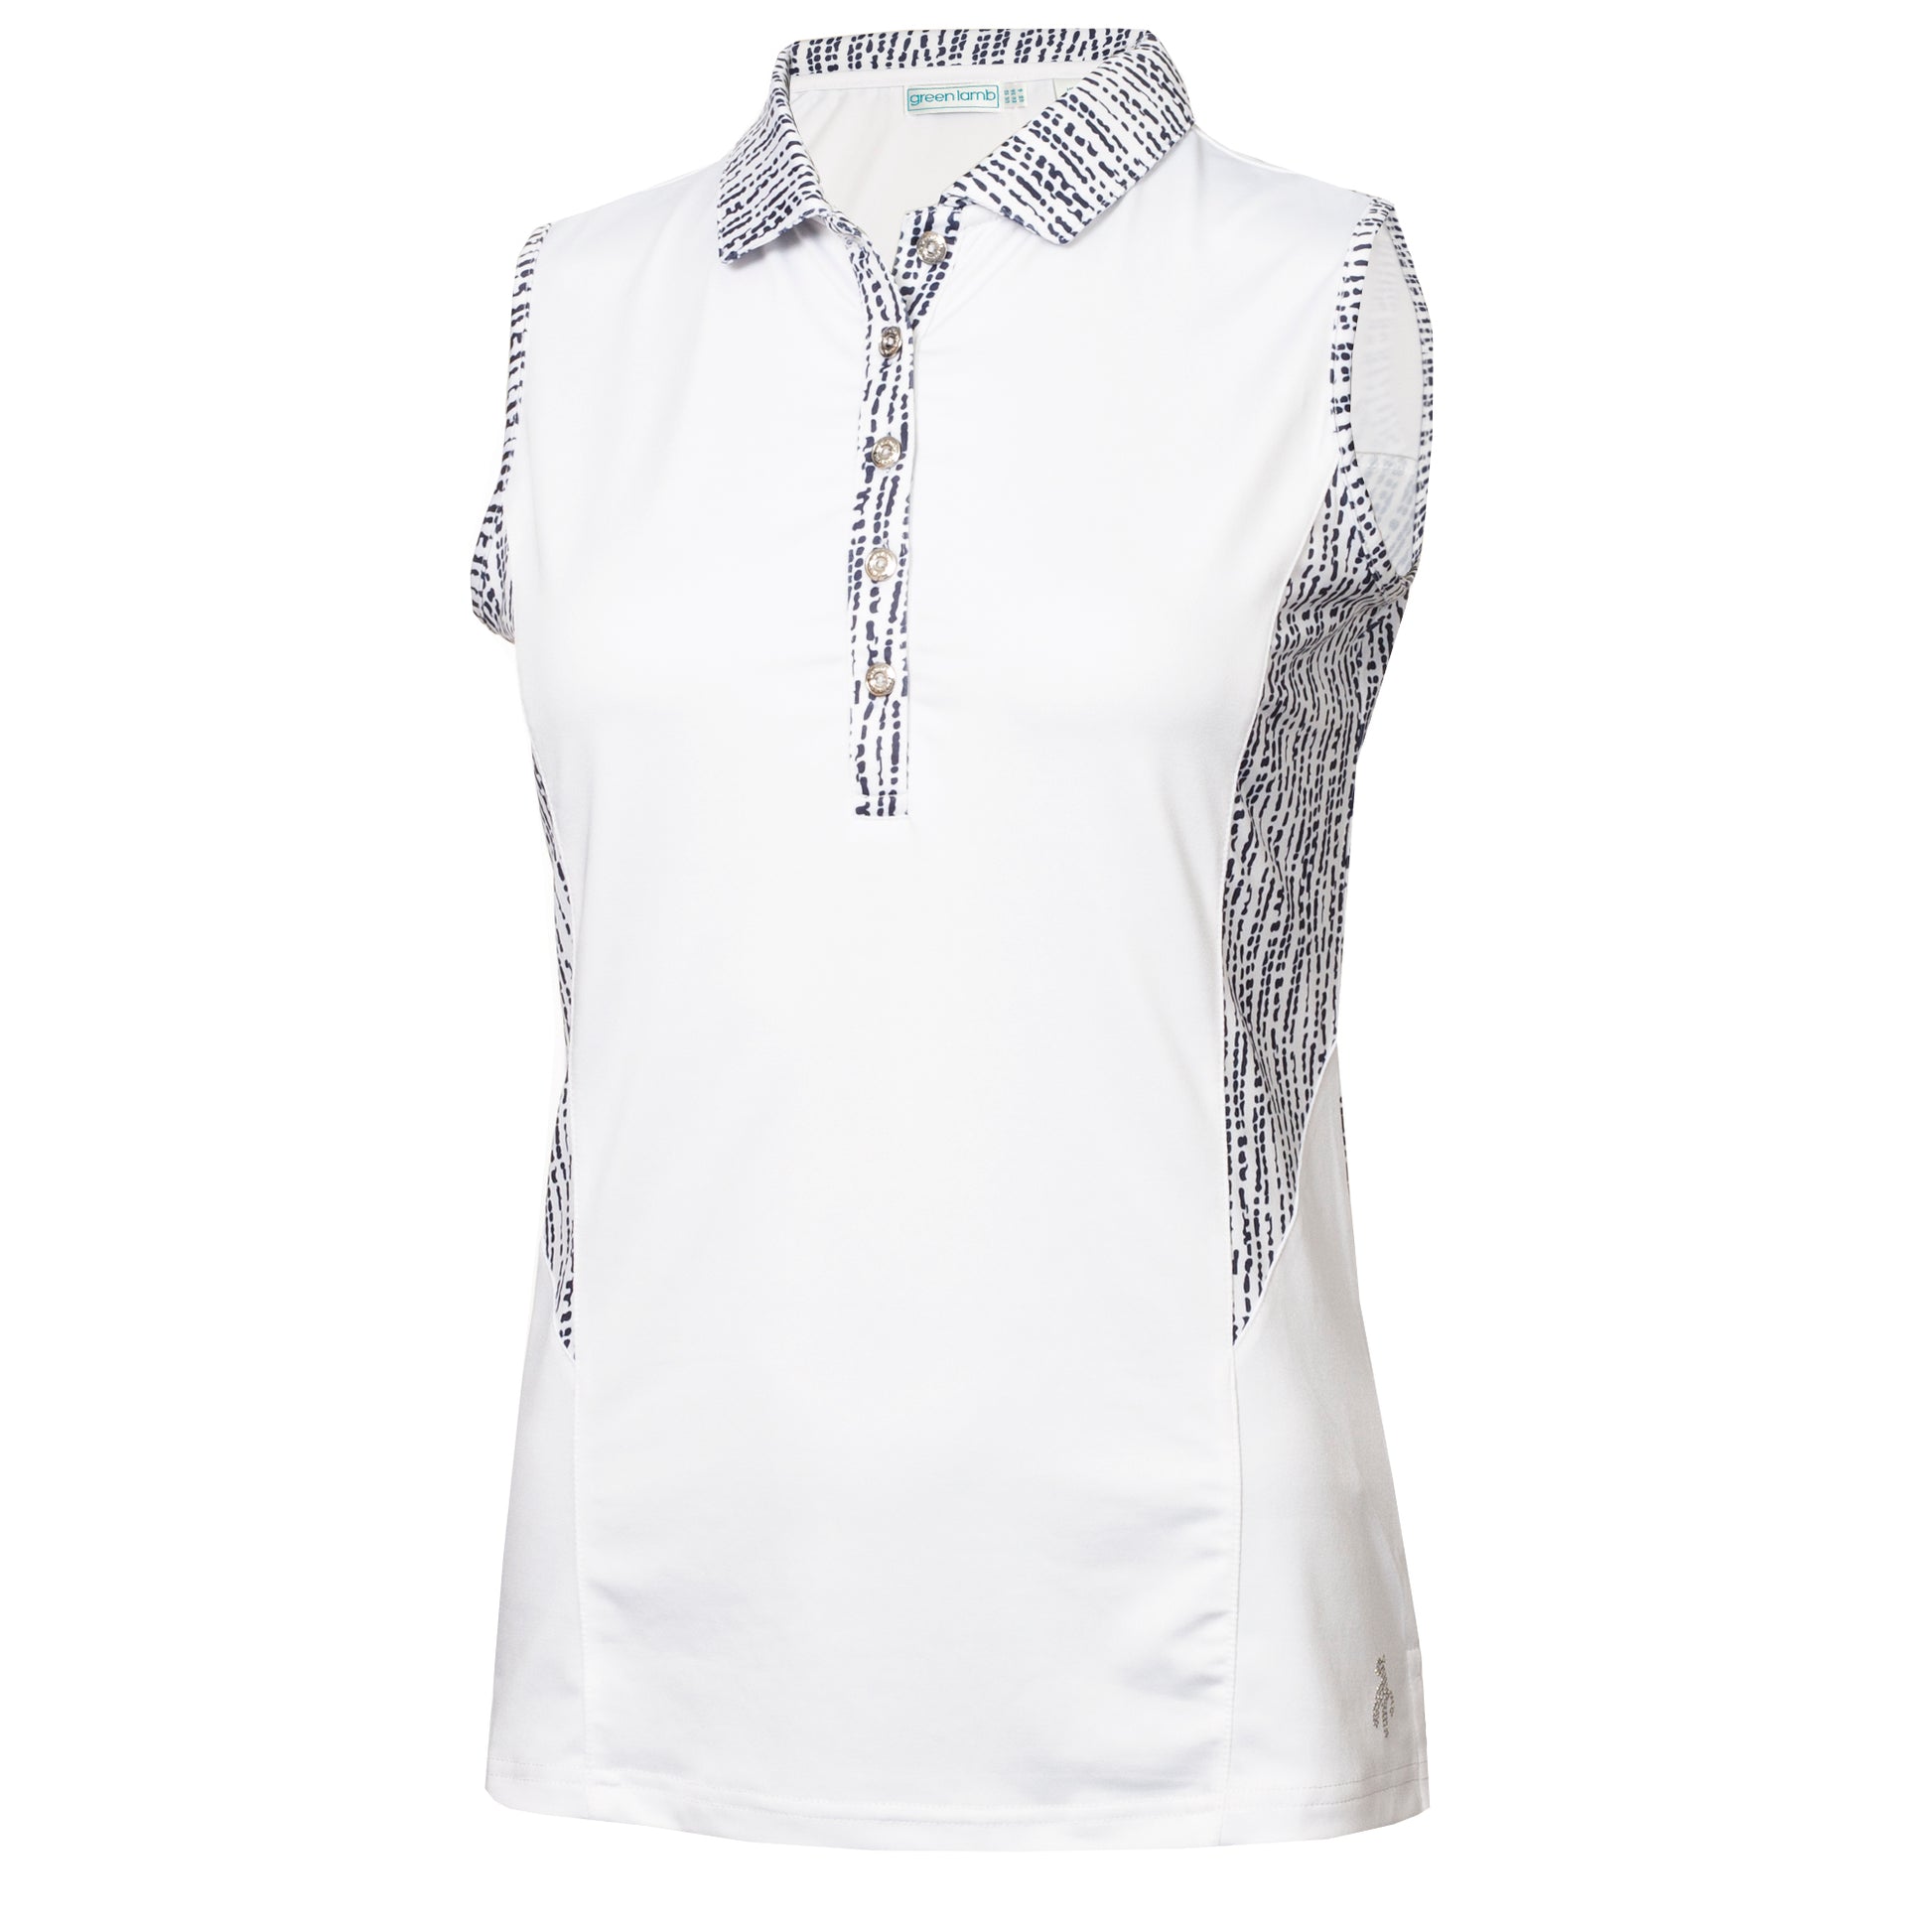 Green Lamb Ladies Sleeveless Polo Shirt with Contrasting Panels in White & Waterfall Print